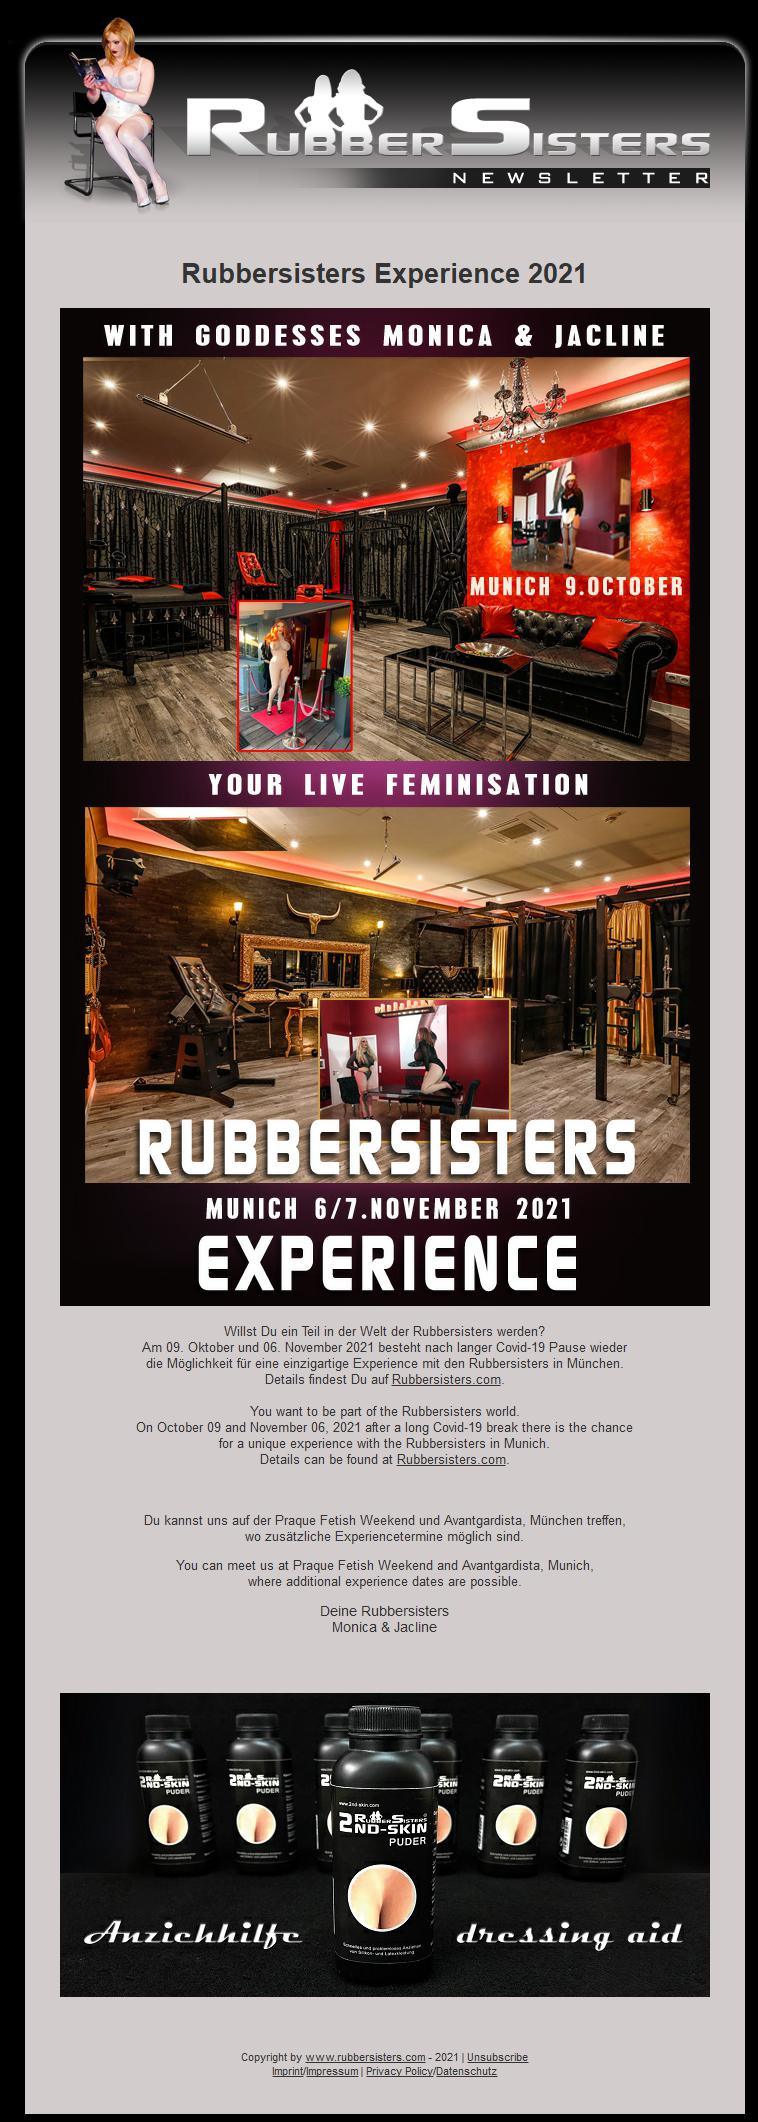 Rubbersisters / 2nd-skin - News 09/2021 - Experience 2021